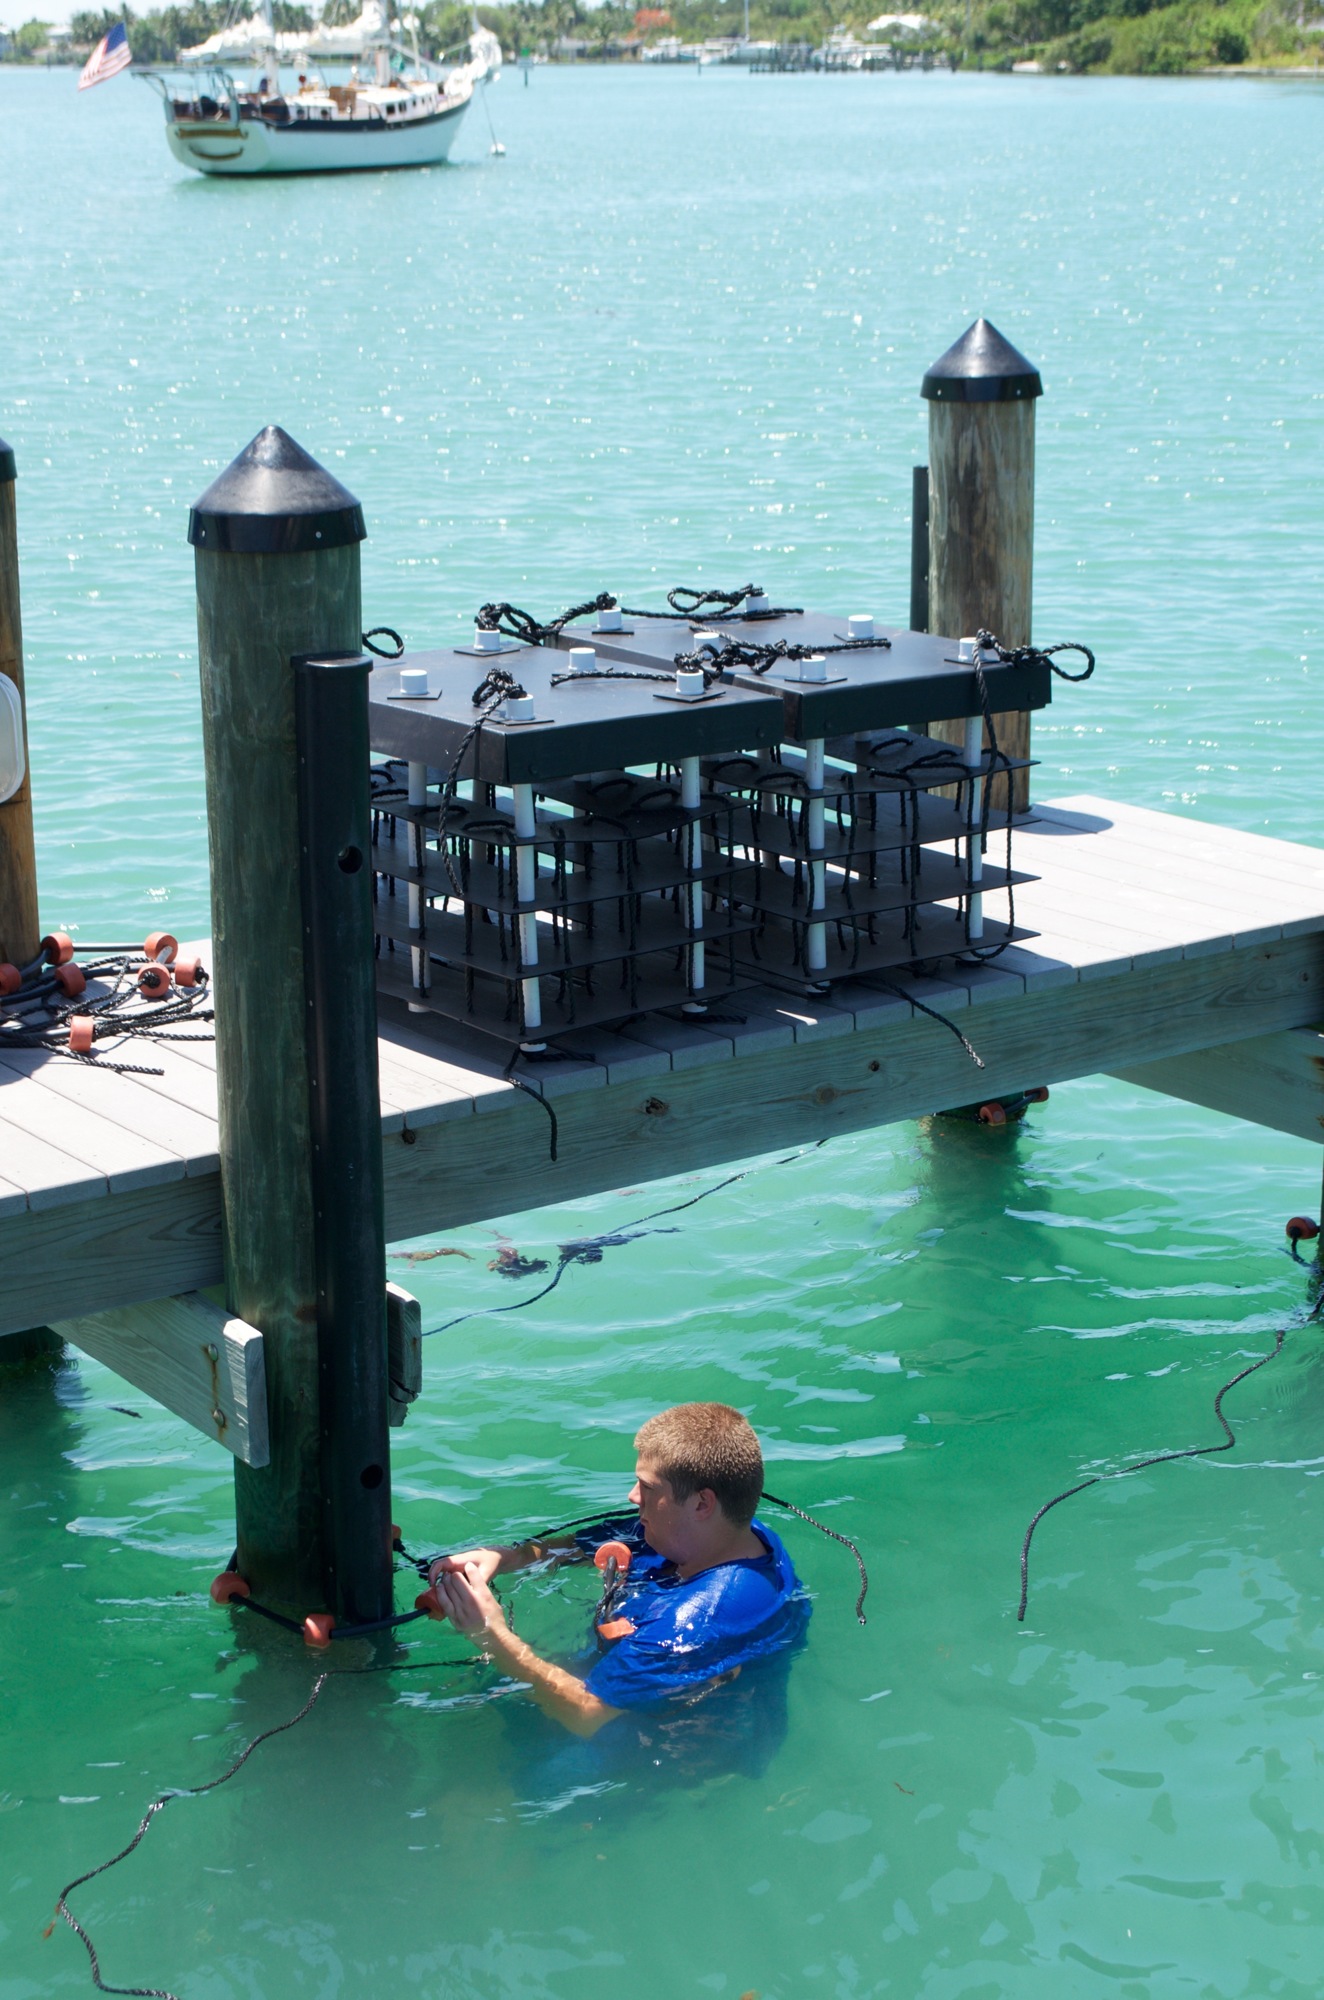 Mini reefs are installed in the water under the docks of Mar Vista Dockside.